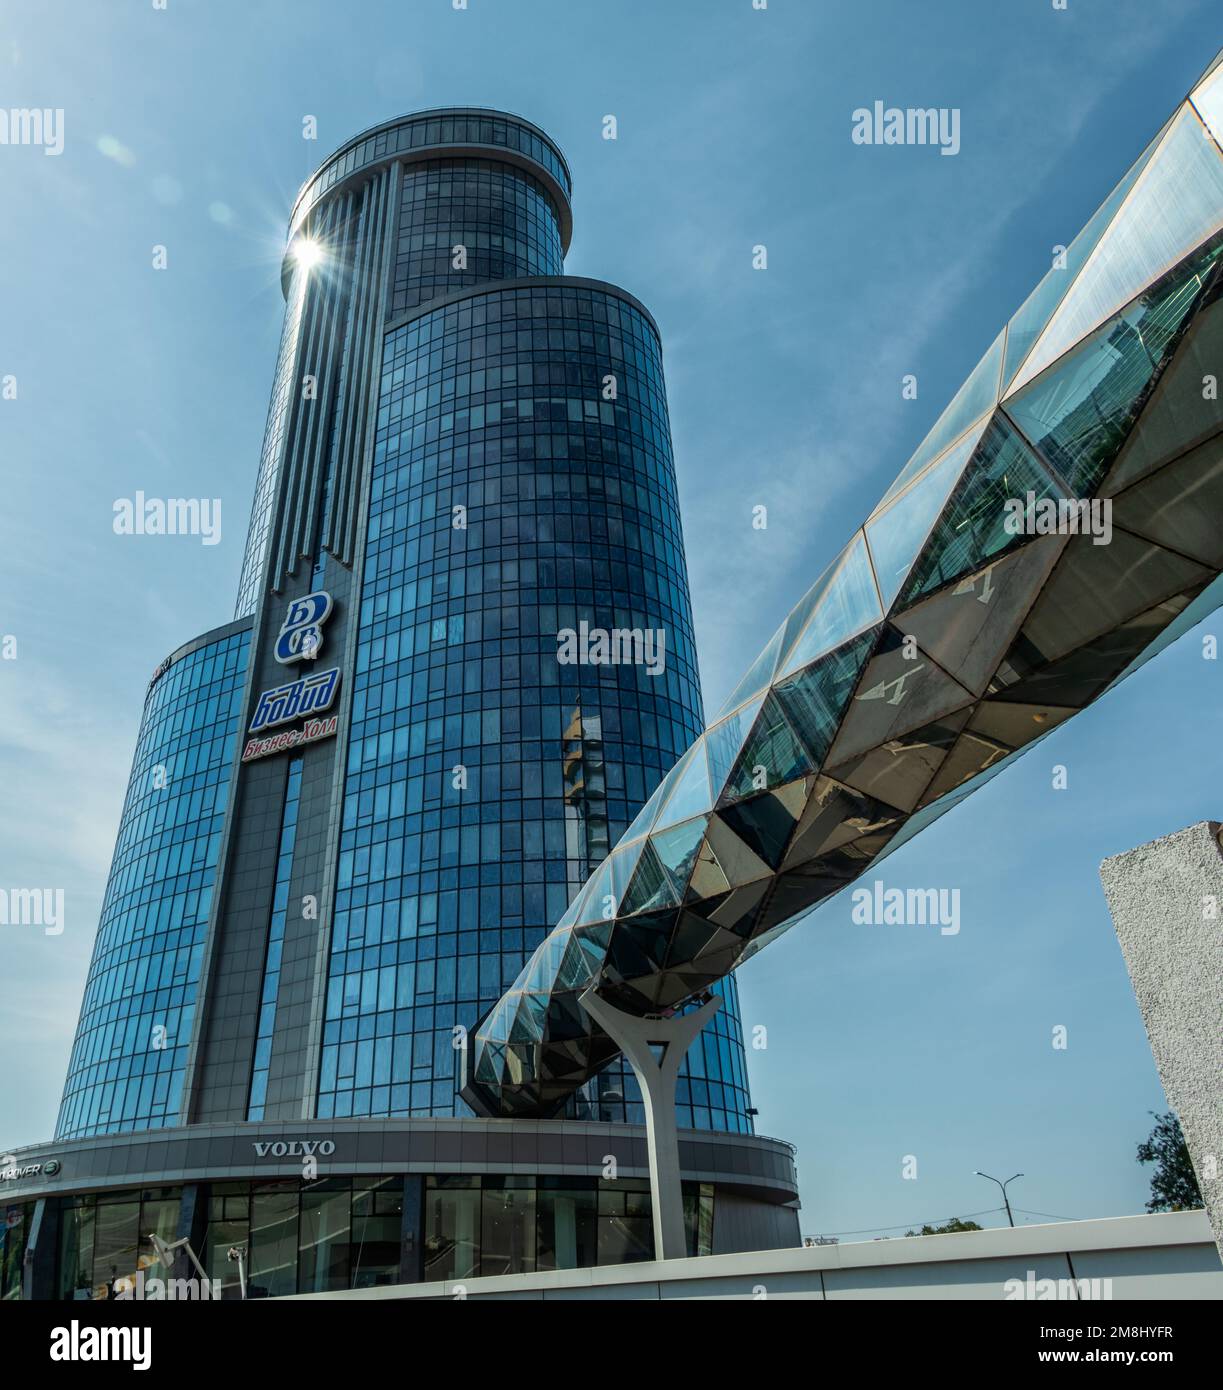 Chelyabinsk, Russia -July 24, 2022. A high-rise building with an overpass entering it against the background of the sky. The inscription on the wall o Stock Photo